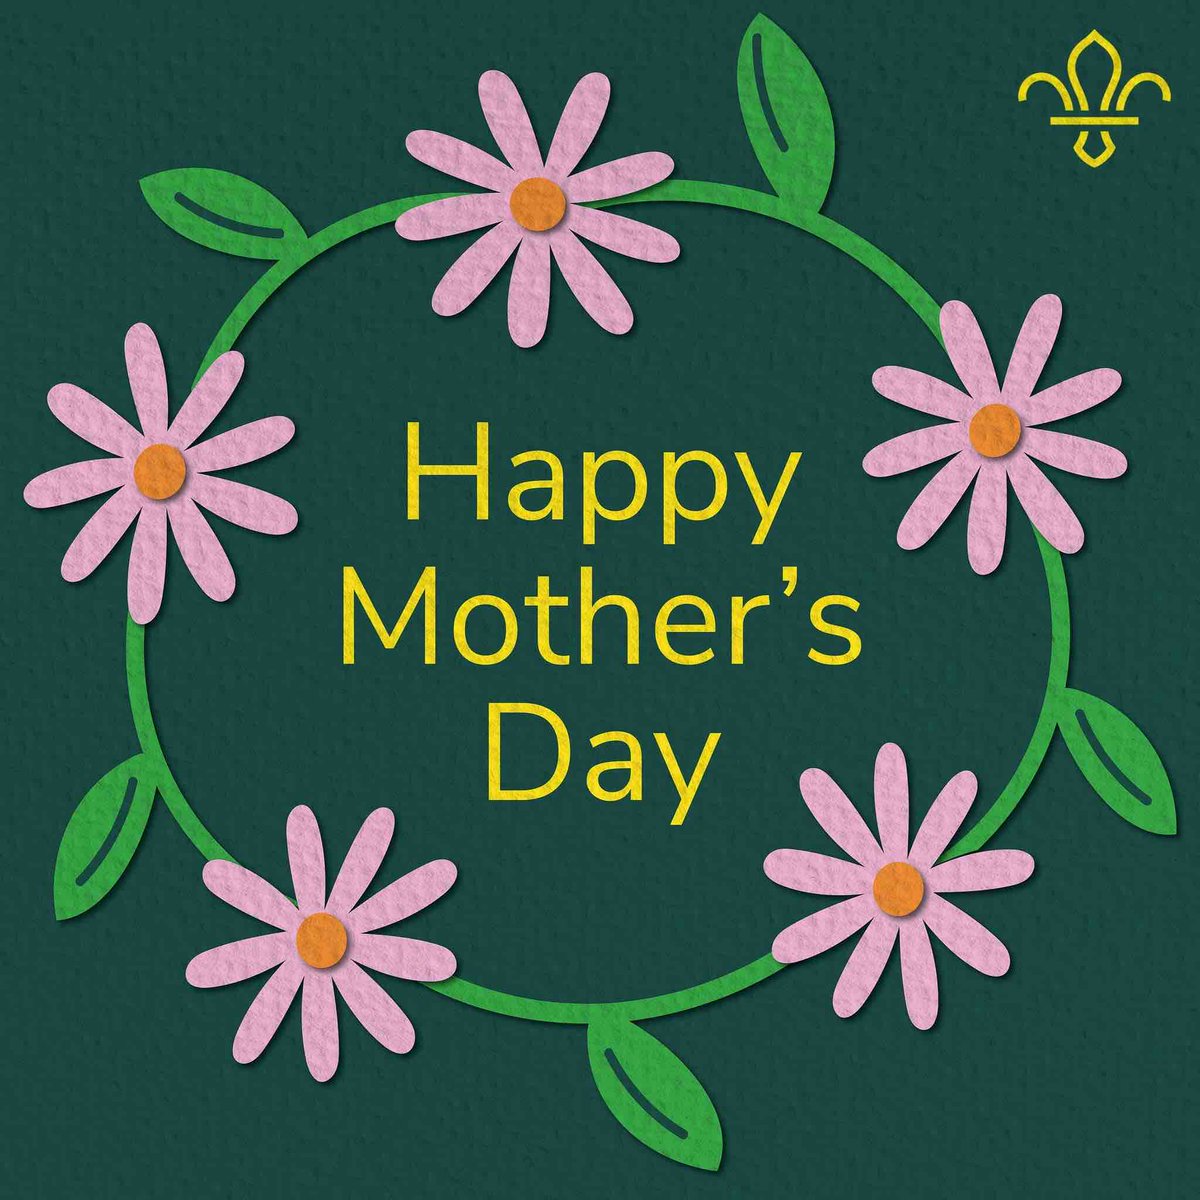 Wishing all the mother-figures a happy Mother’s Day! From mums, step-mums, sisters, aunts and grandmas to best friends, volunteers and leaders - we’re so grateful for you. 🌸